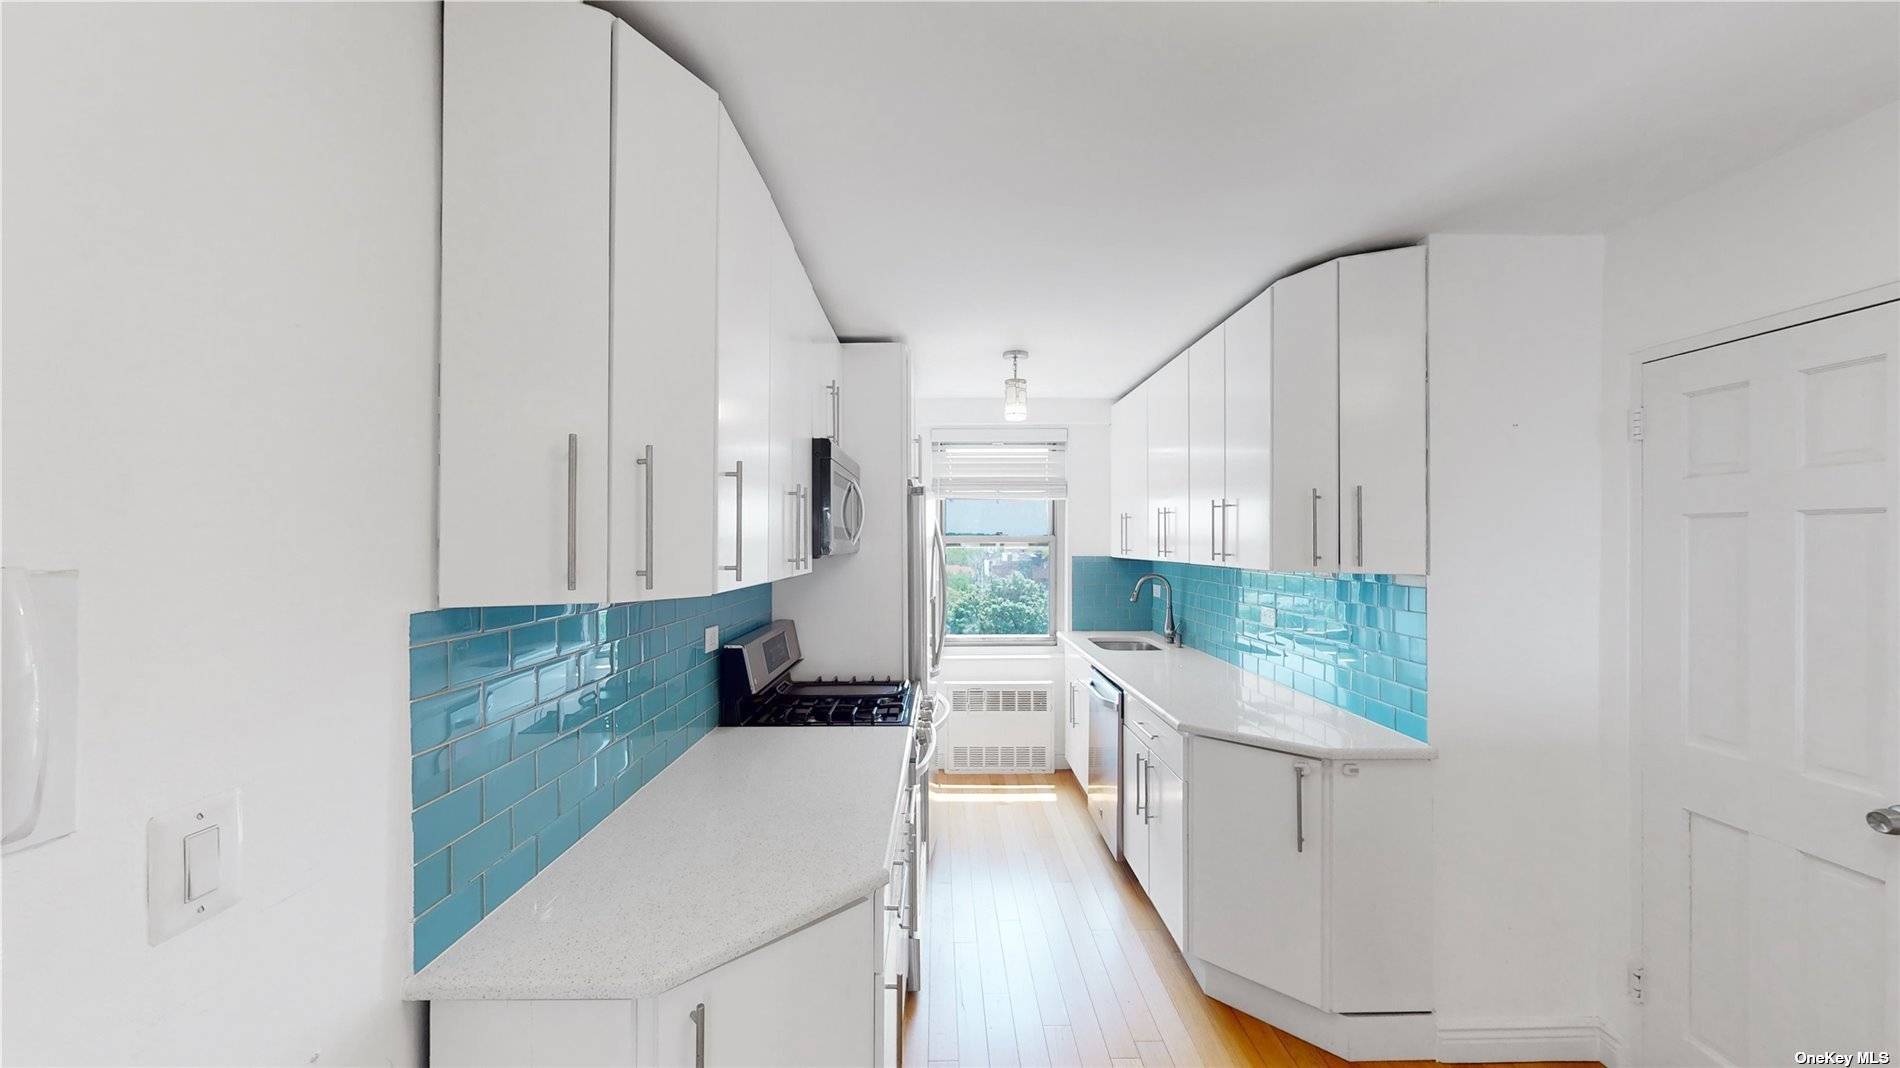 Large, FULLY Renovated 2BR 2 Baths, located in the Heart of Forest Hills.